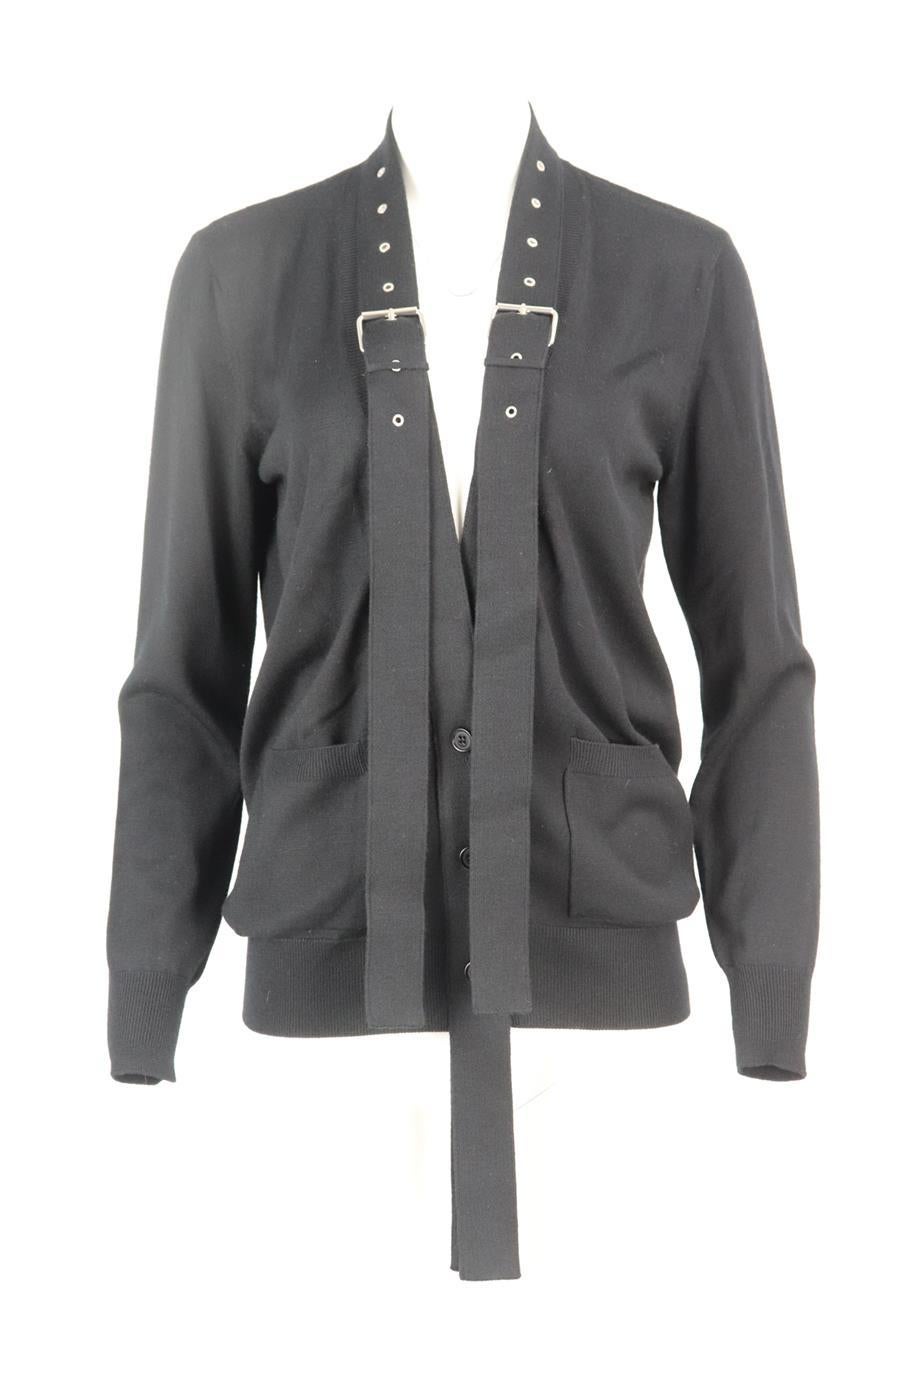 Givenchy wool and silk blend cardigan. Black. Long sleeve, v-neck. Button fastening at front. 70% Wool, 30% silk; fabric2: 60% viscose, 40% cotton. Size: Small (UK 8, US 4, FR 36, IT 40). Bust: 38.4 in. Waist: 38 in. Hips: 31 in. Length: 27.5 in.